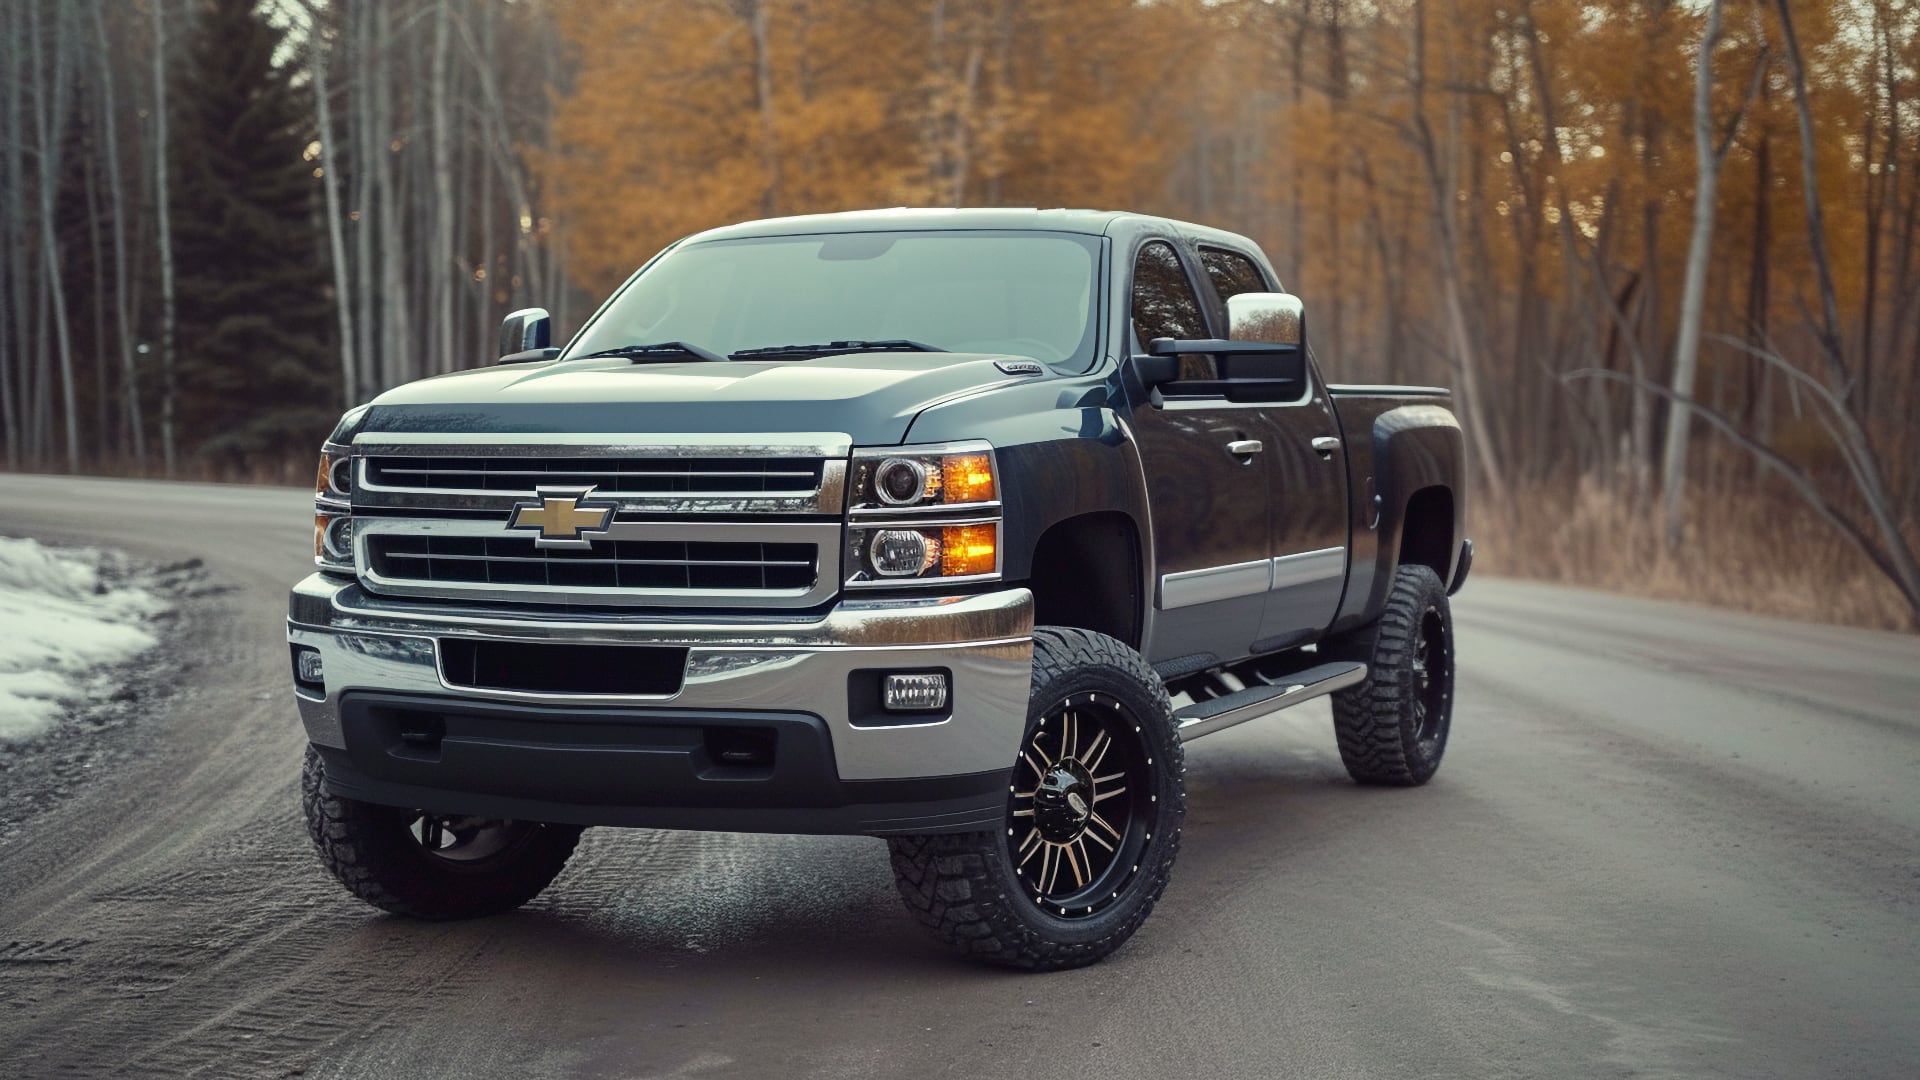 A black Chevrolet Silverado, one of the years to avoid, is driving down a dirt road.